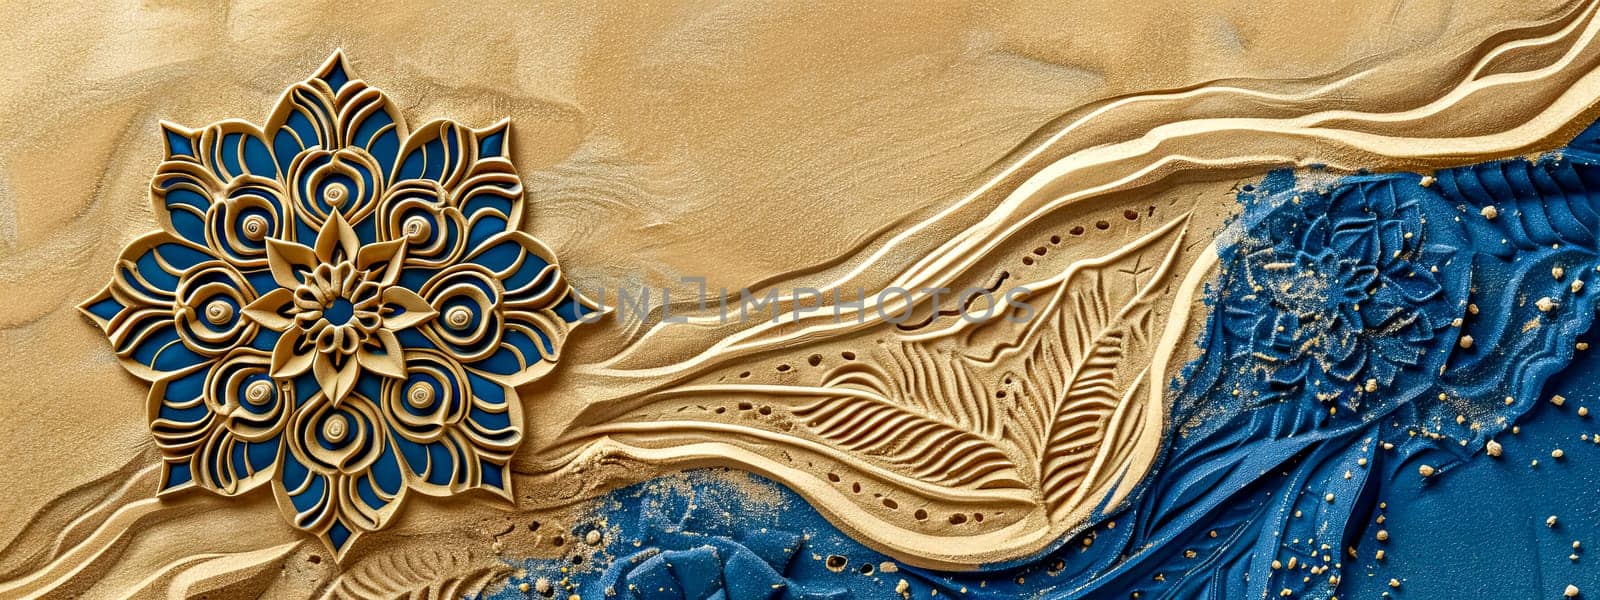 Artistic composition with a golden mandala on sand adjoining vibrant blue textured material